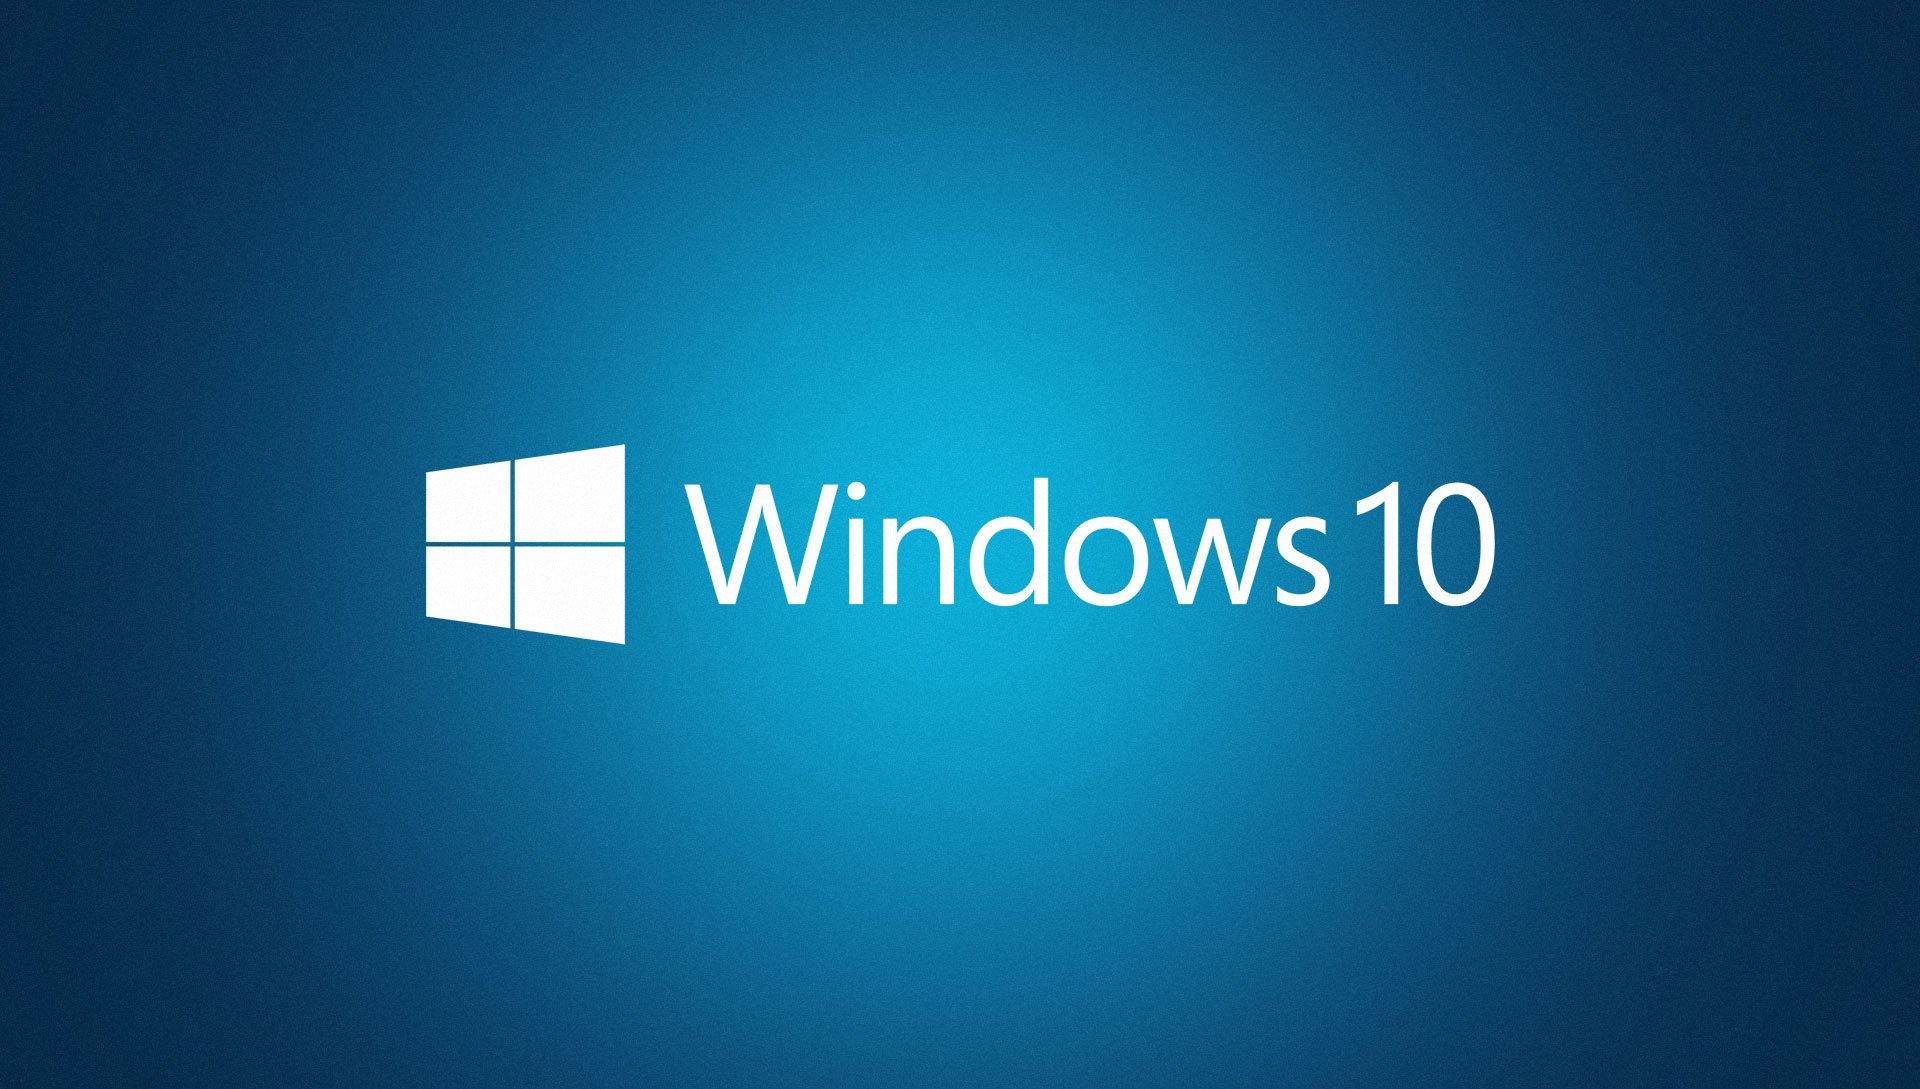 Windows 10: automatic updates can finally be stopped